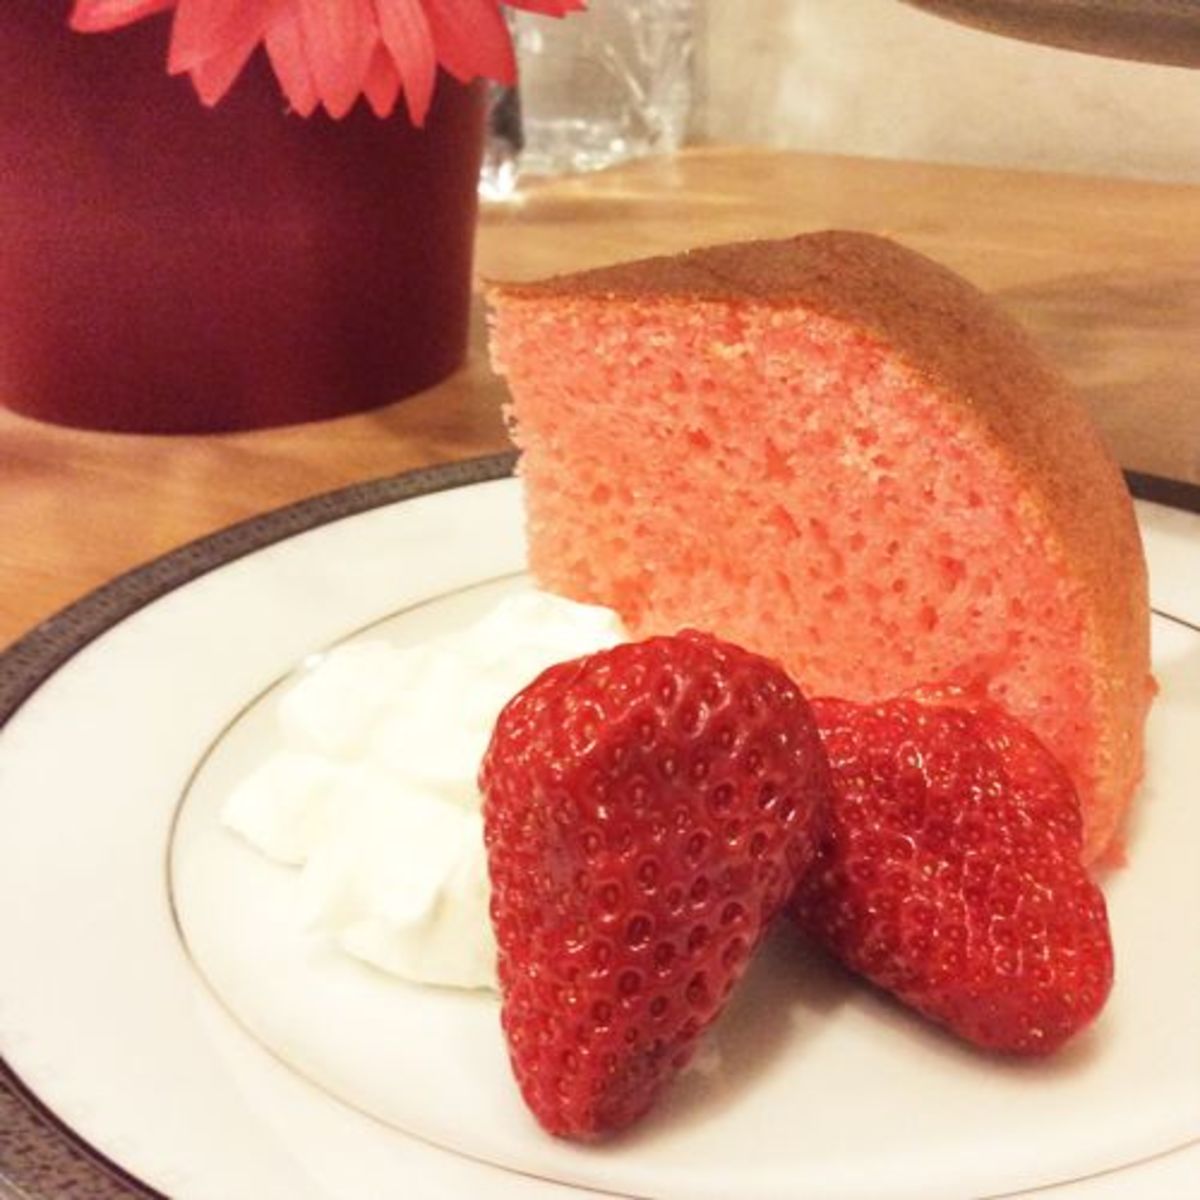 A moist slice of cake made in a rice cooker